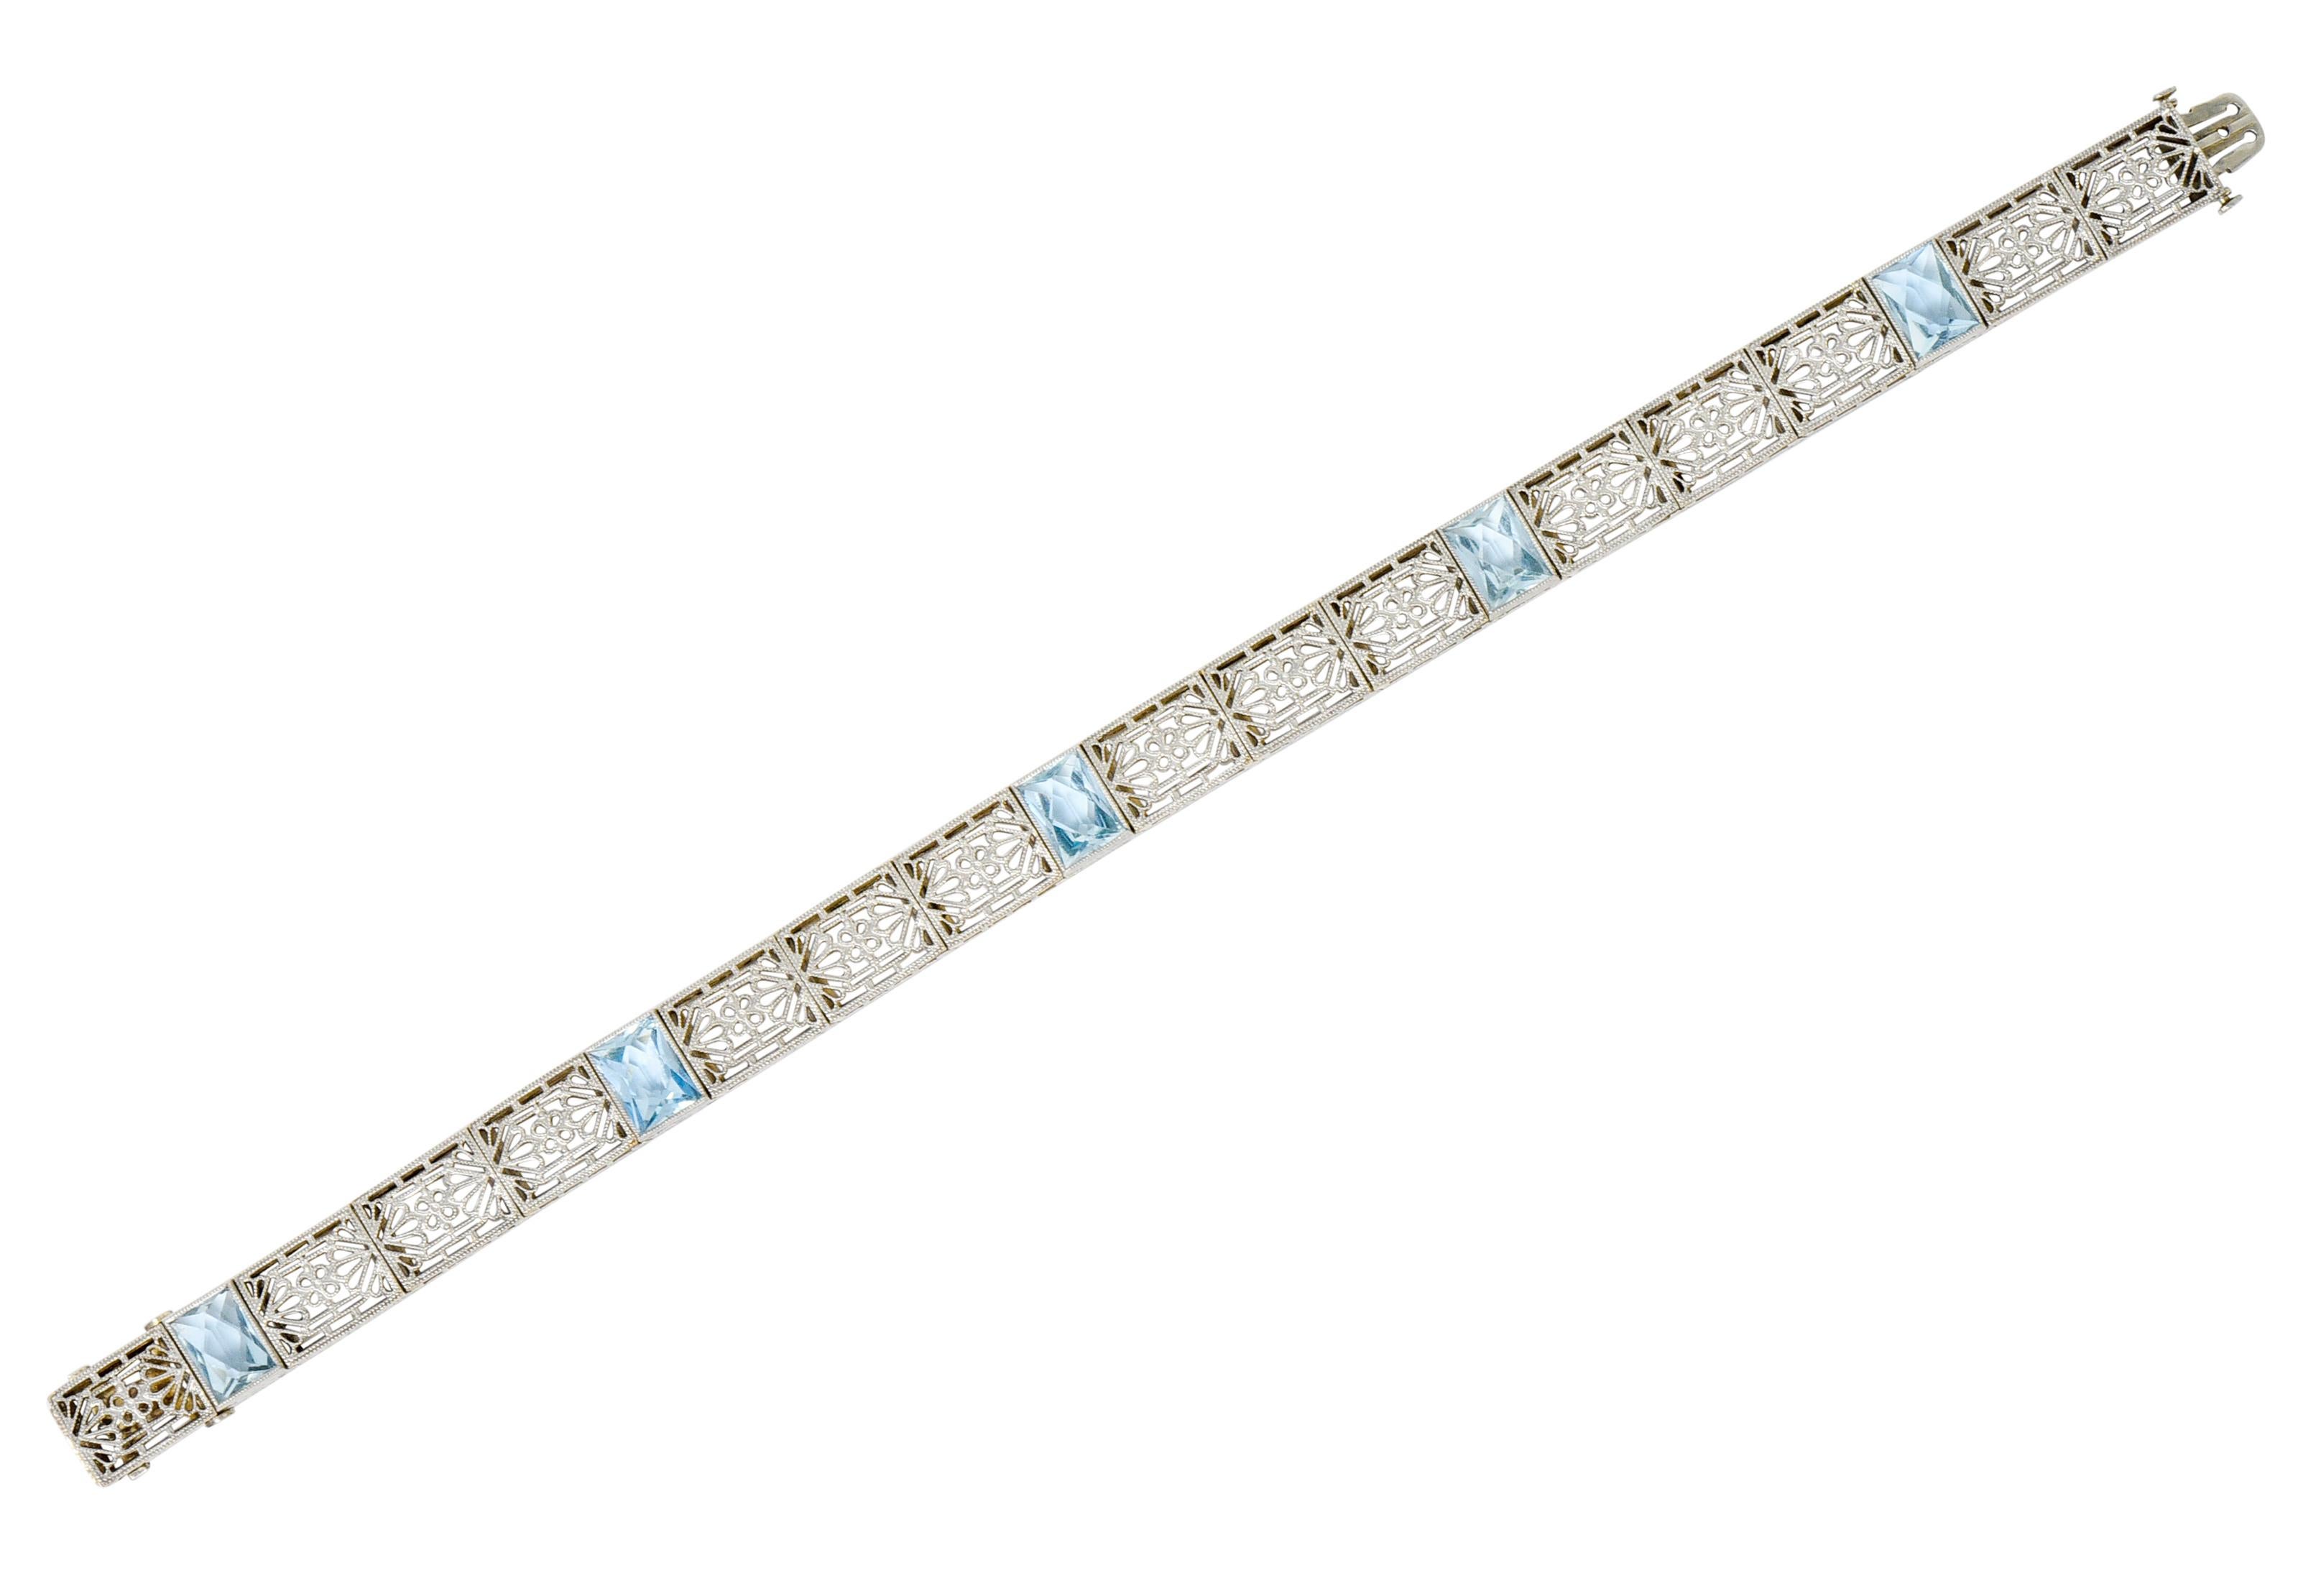 Streamlined bracelet comprised of intricately pierced milgrain links centering a flower motif within a geometric design accented by scalloped clam motif

Accented throughout by five bezel set rectangular French cut aquamarines, very well-matched and